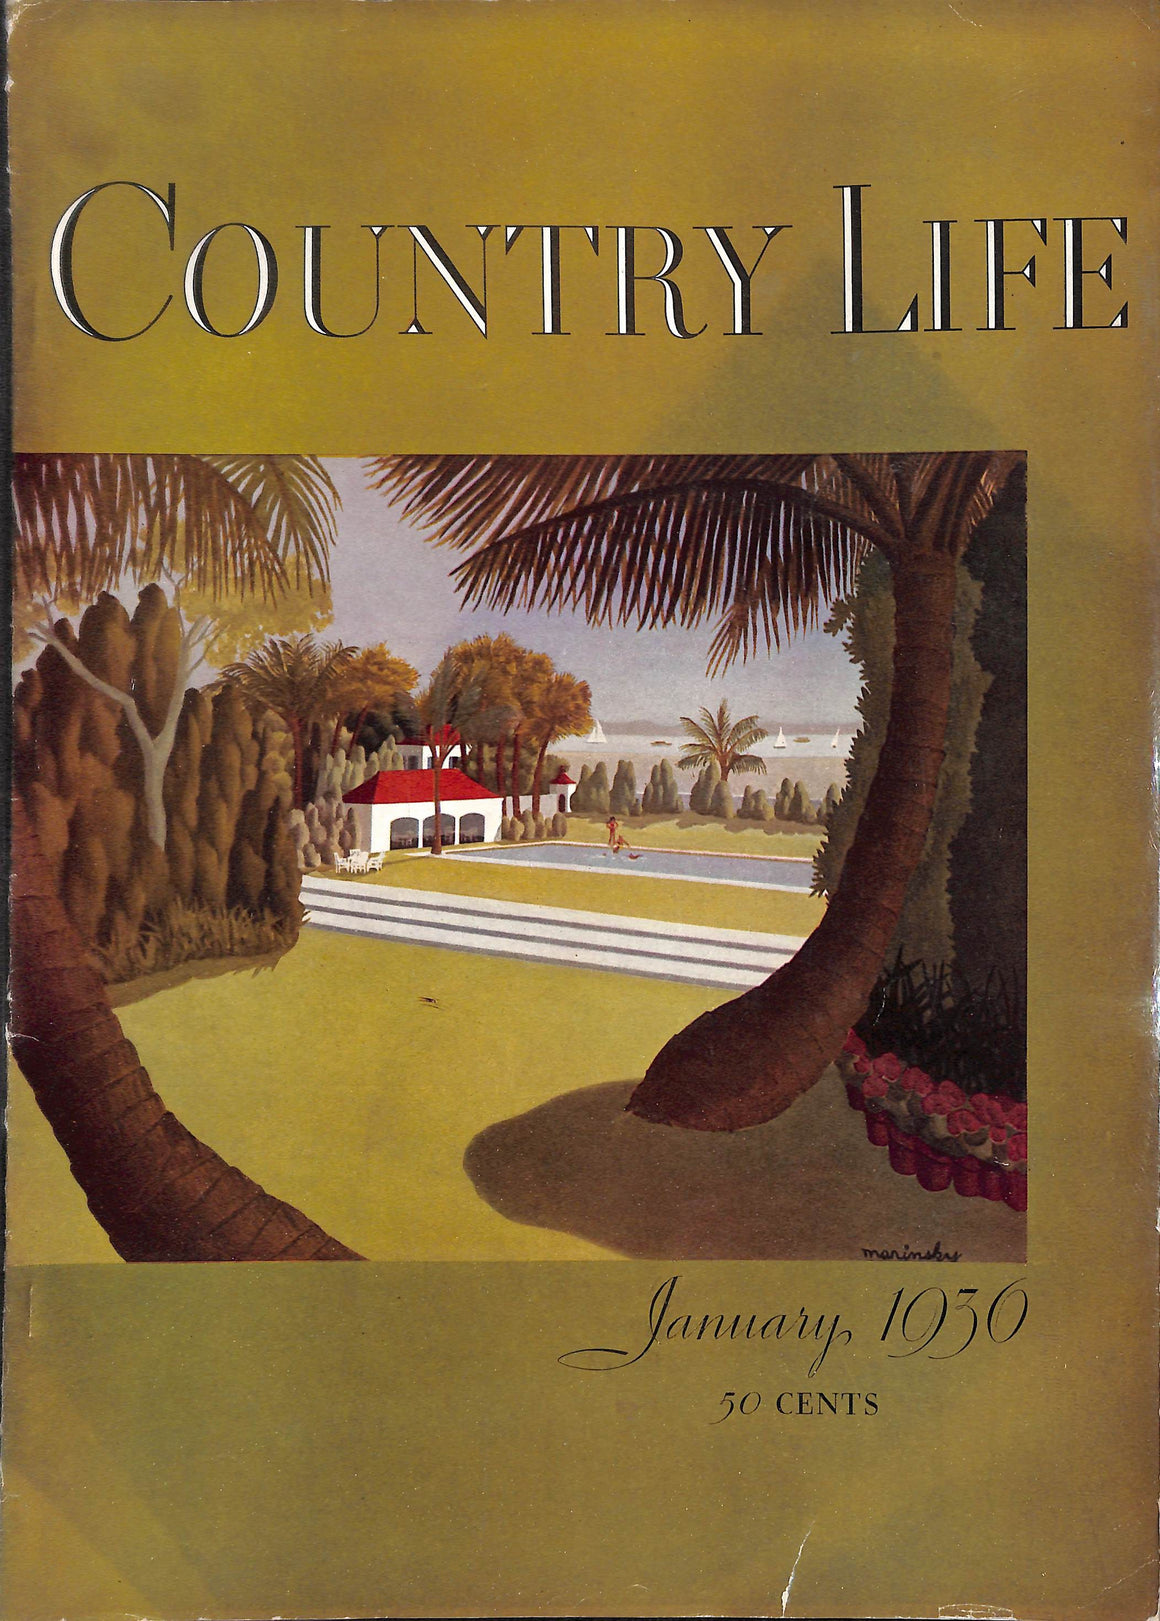 "Country Life January 1936"